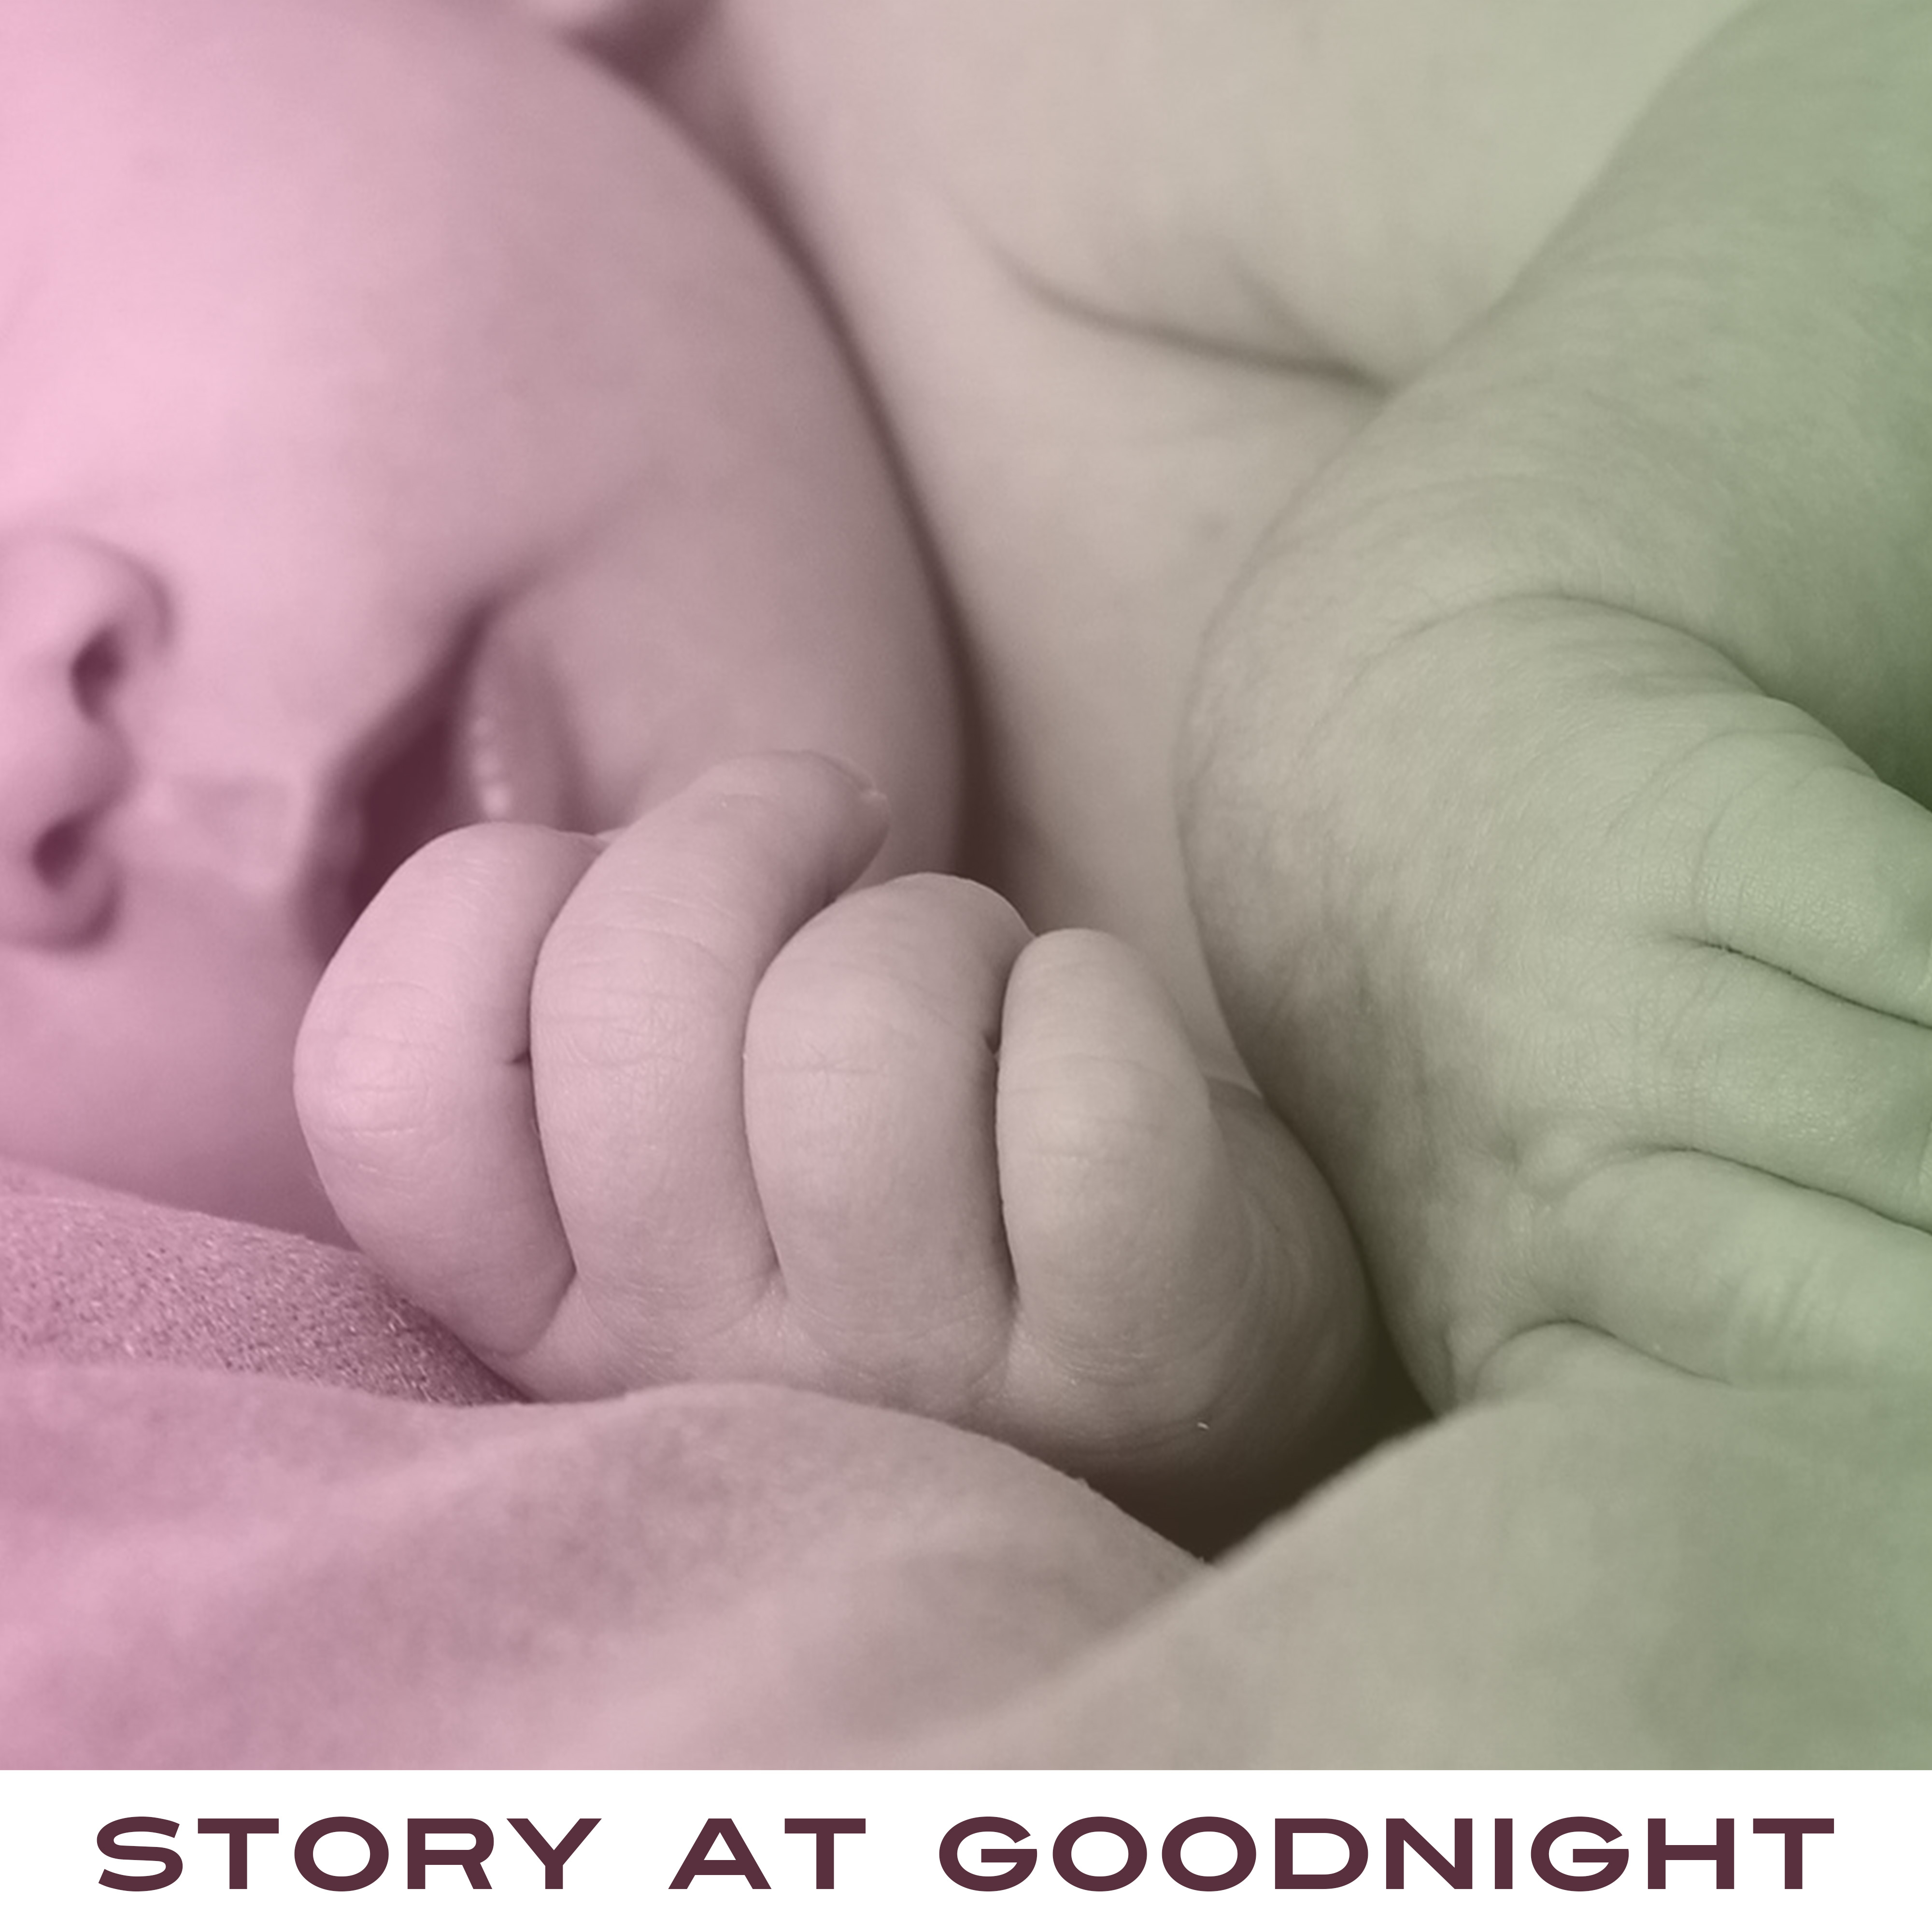 Story at Goodnight  Lullabies for Baby, Restful Sleep, Harmony for Child, Calm Night, Healing Melodies to Bed